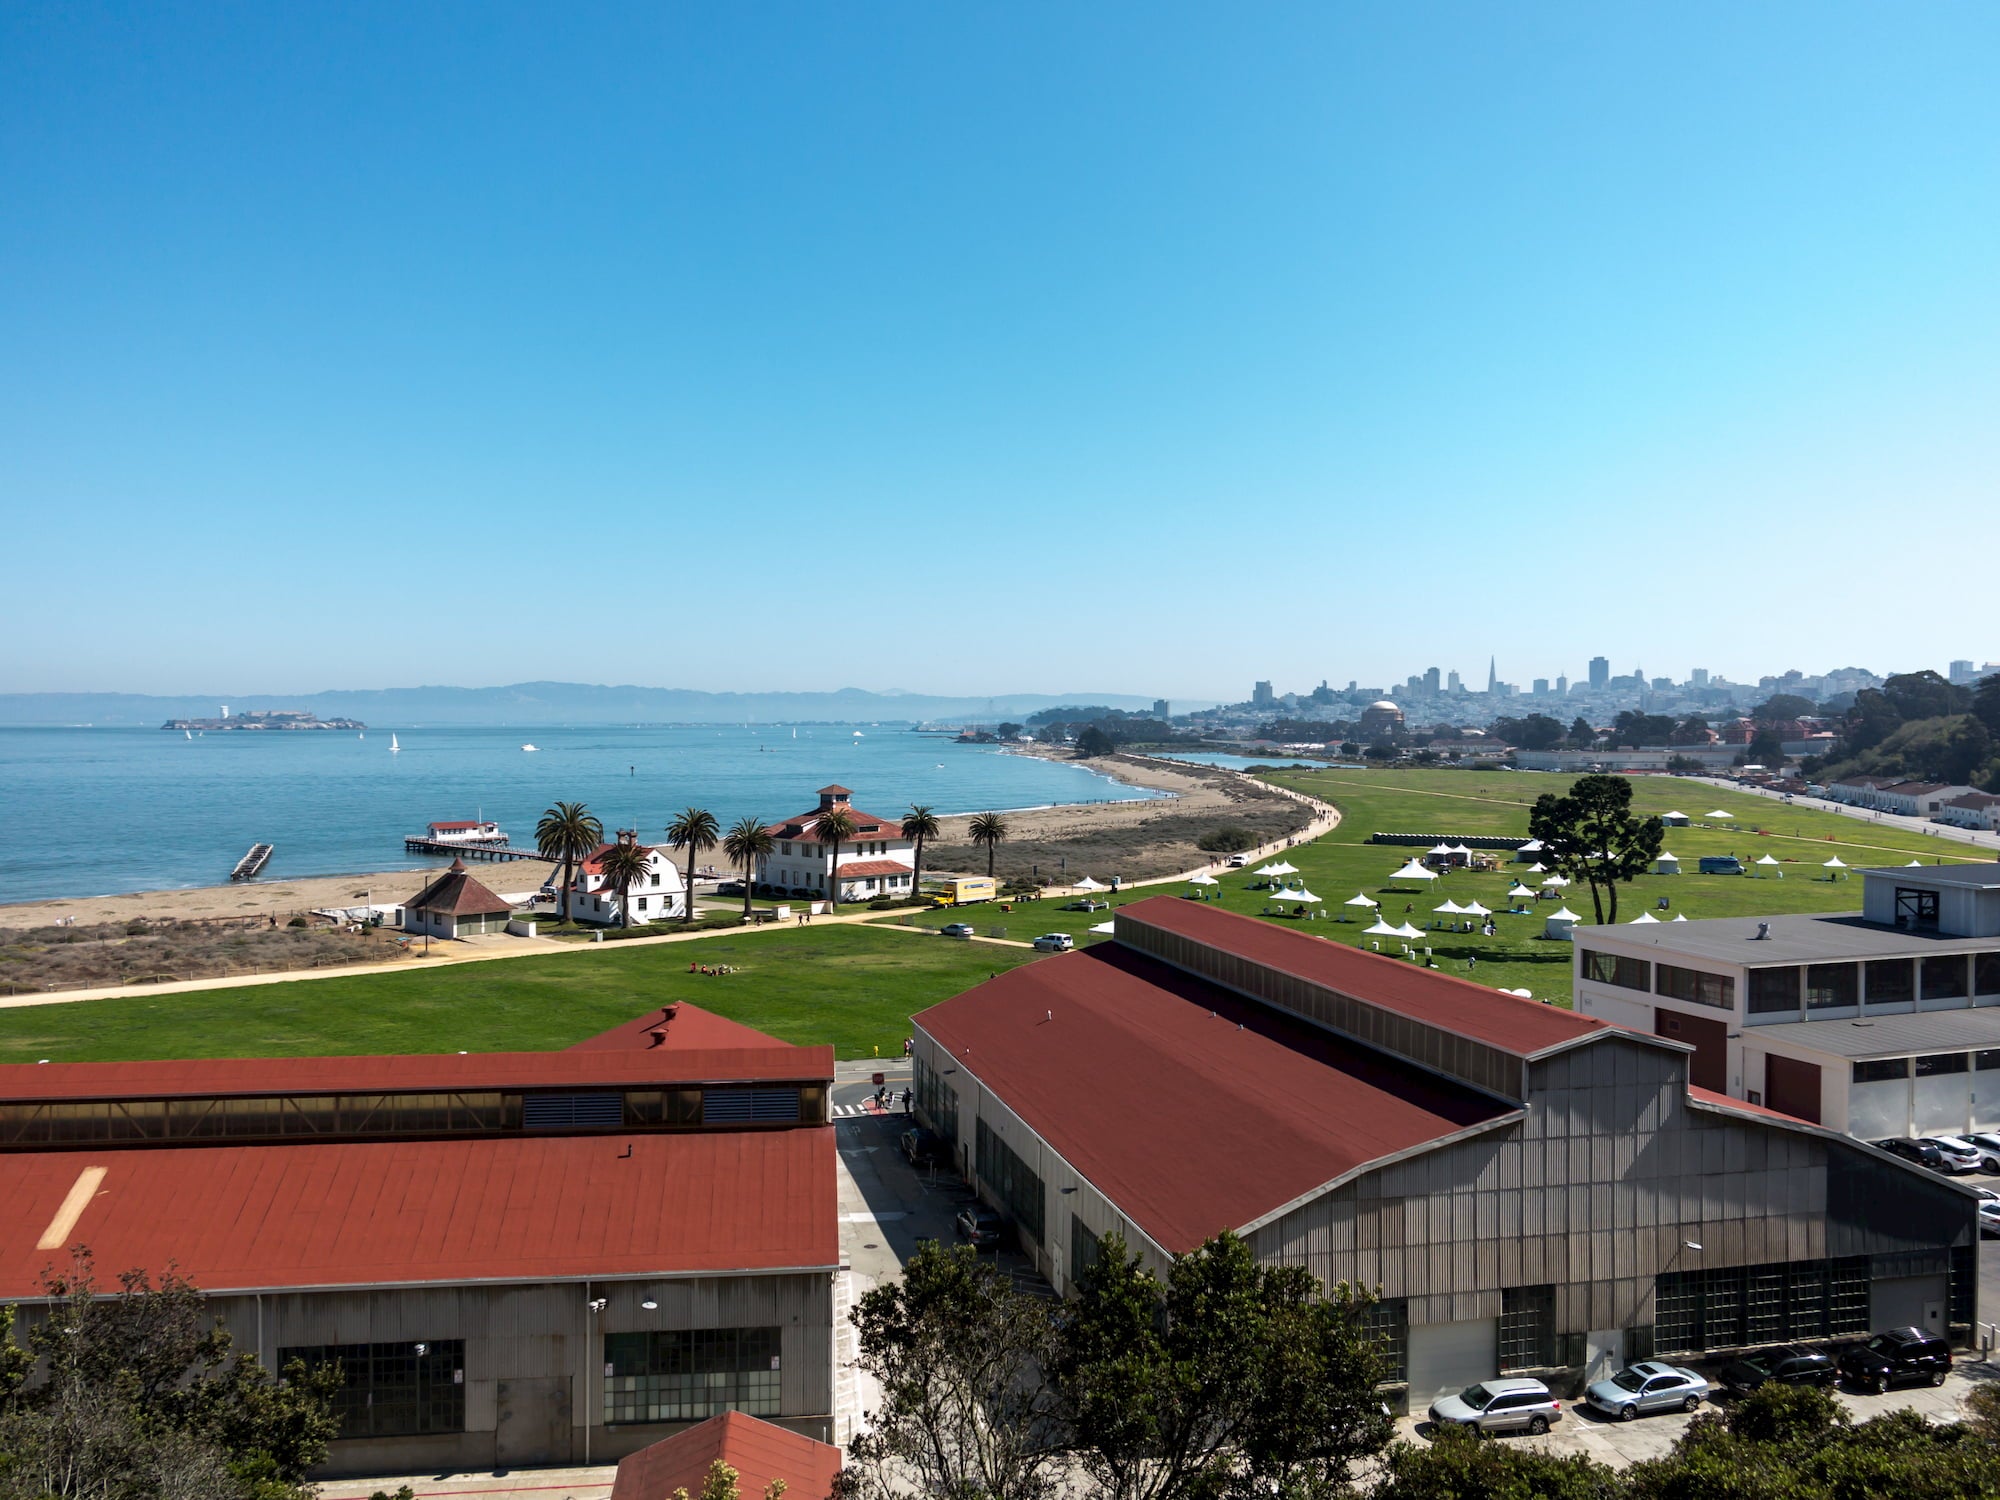 Presidio in San Fransisco, large buildings in foreground and large grass field and ocean in background